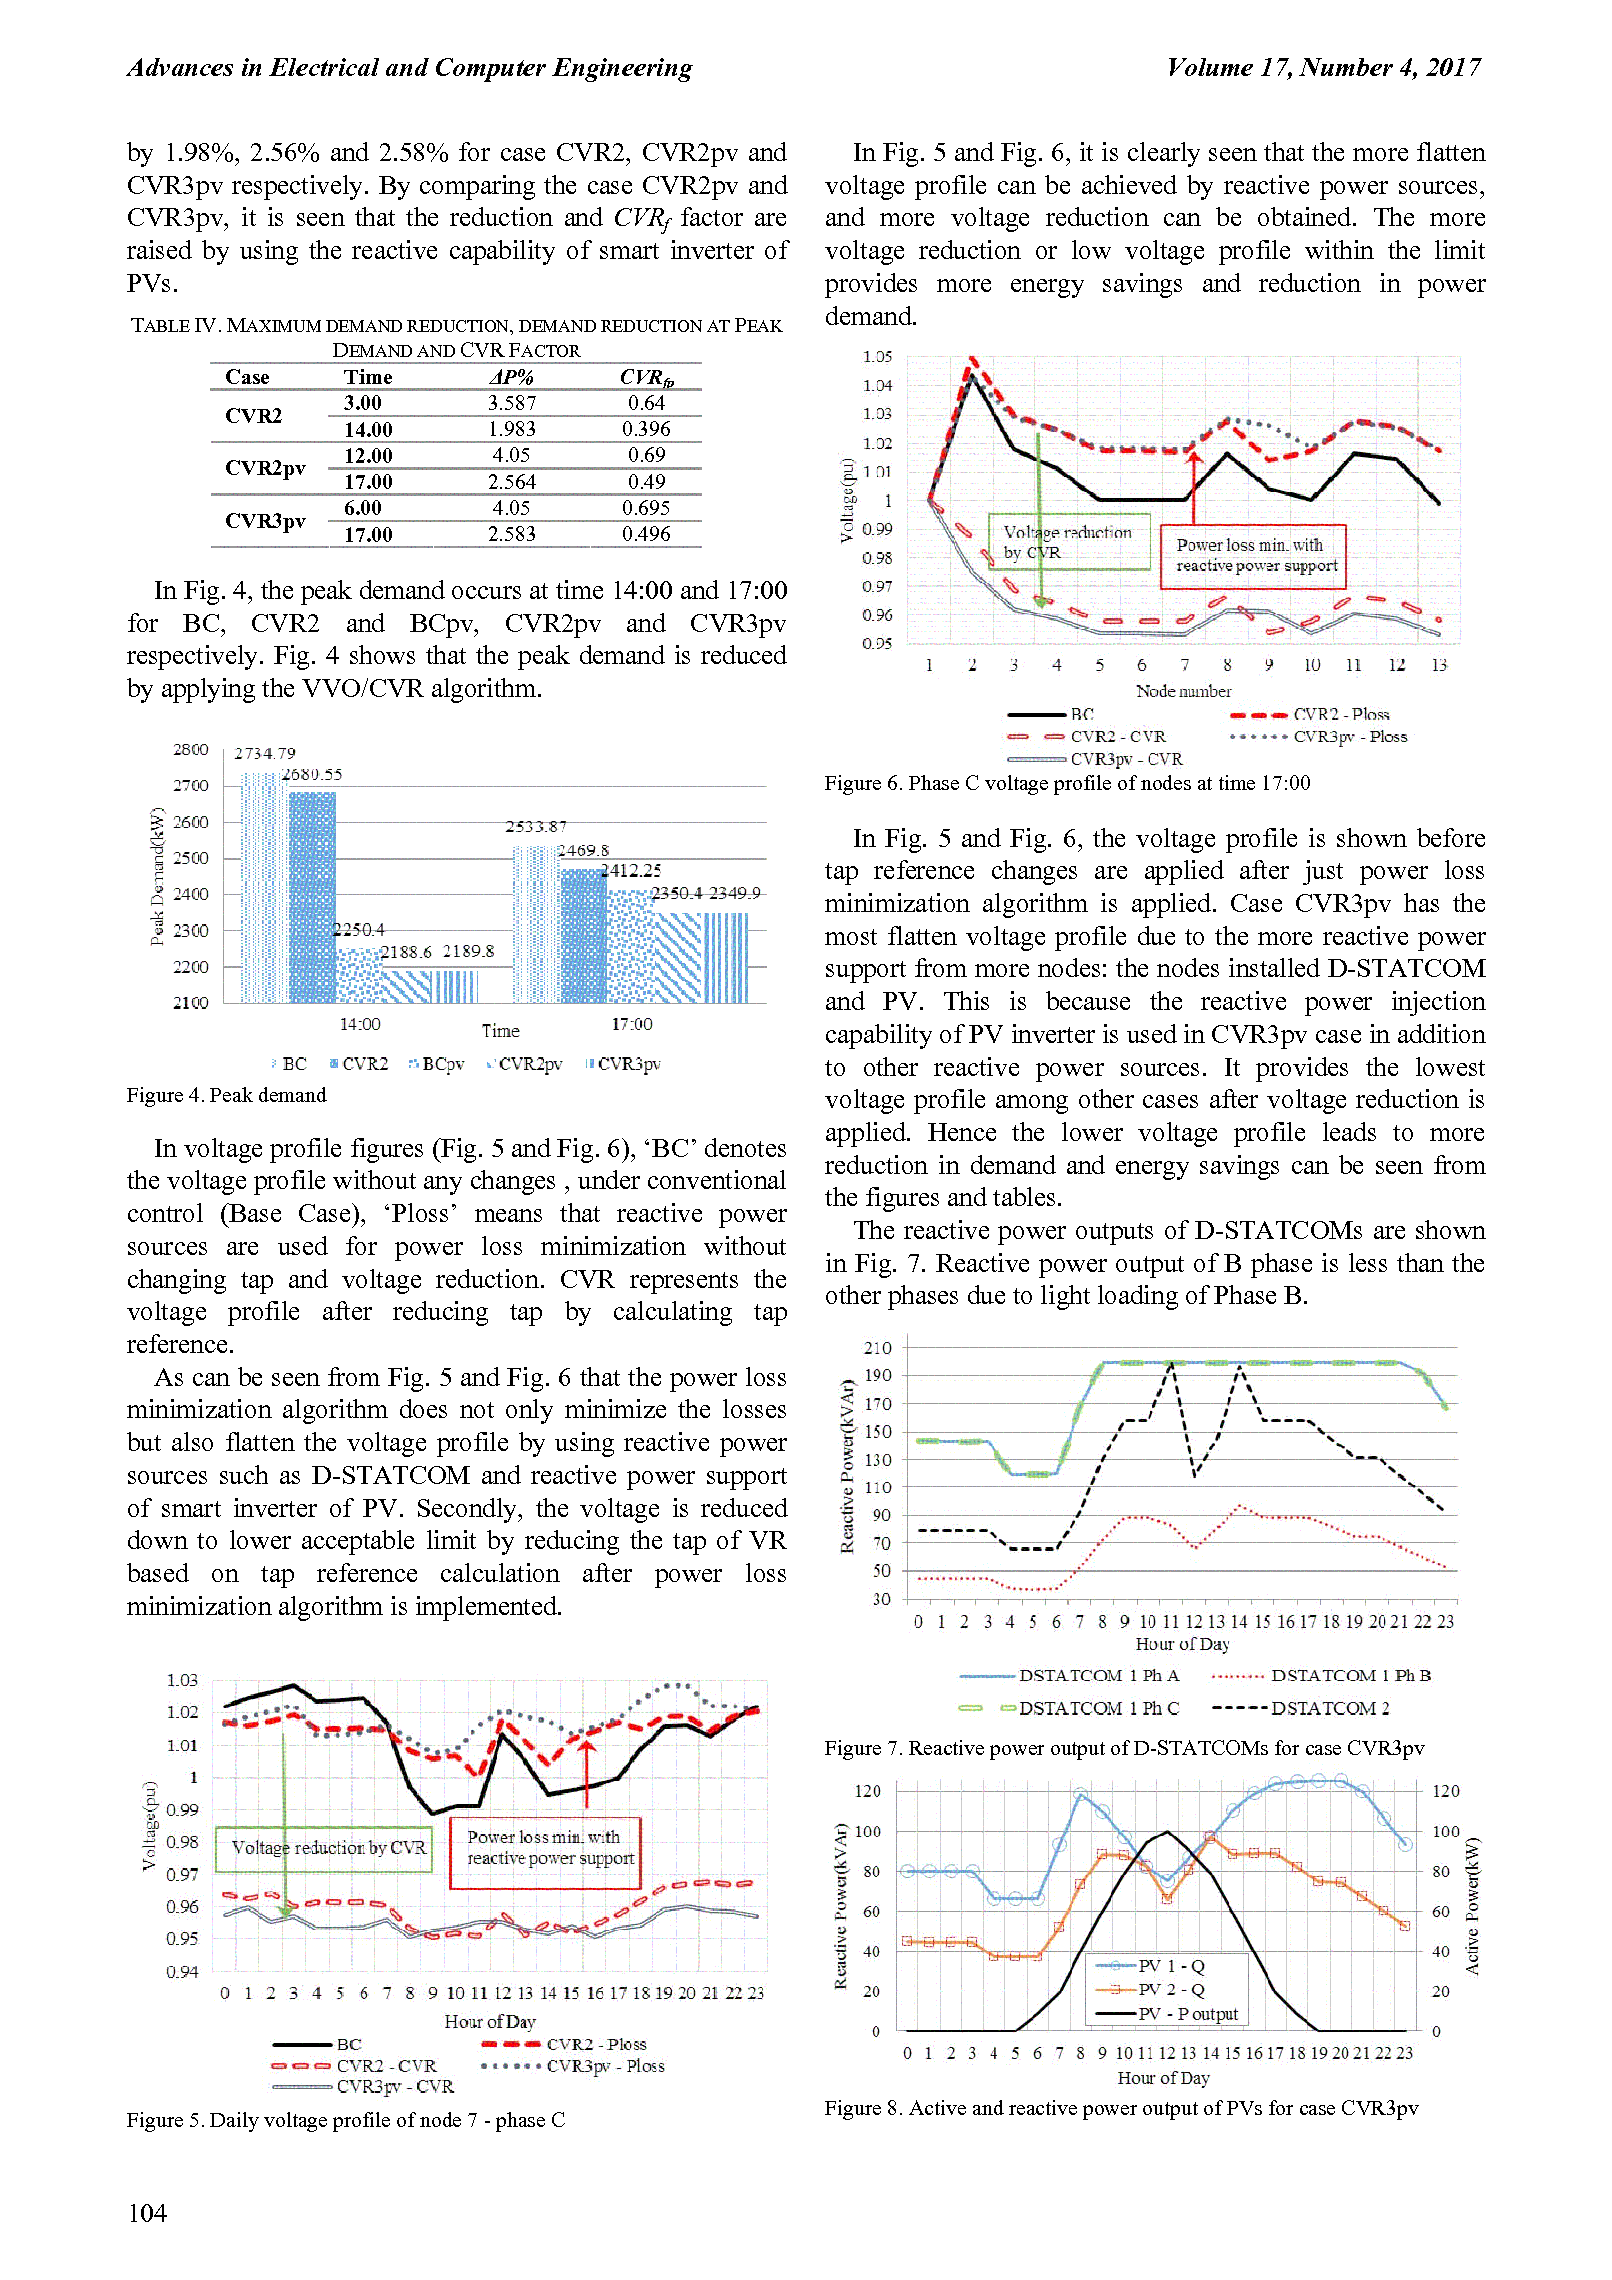 PDF Quickview for paper with DOI:10.4316/AECE.2017.04012